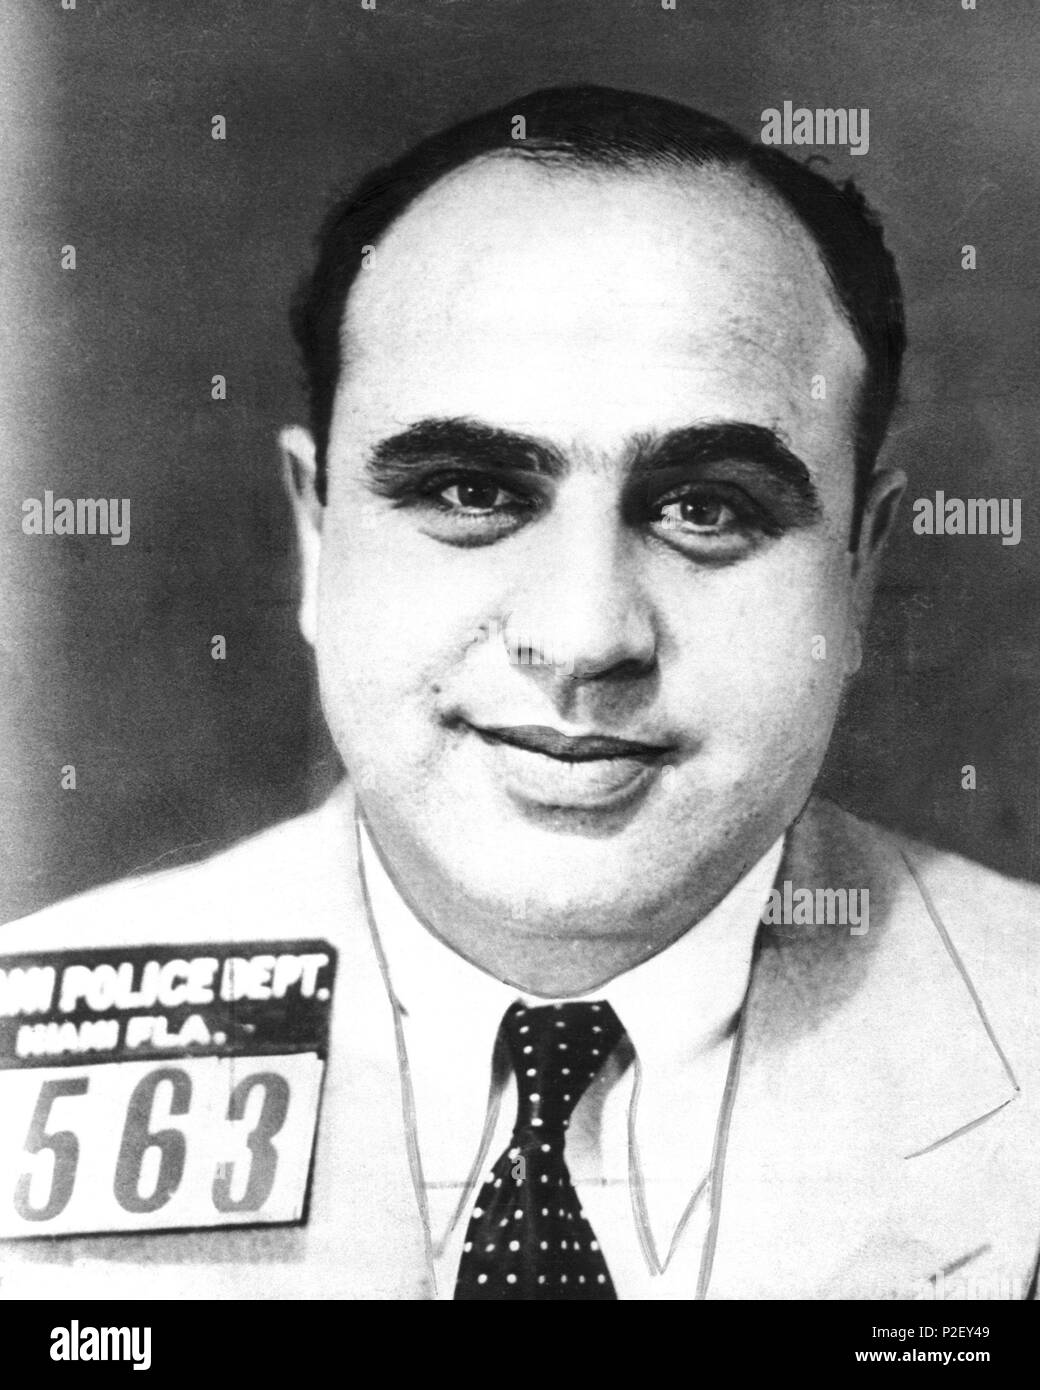 Al Capone photographed after having been arrested in Miami, c. 1930. Stock Photo